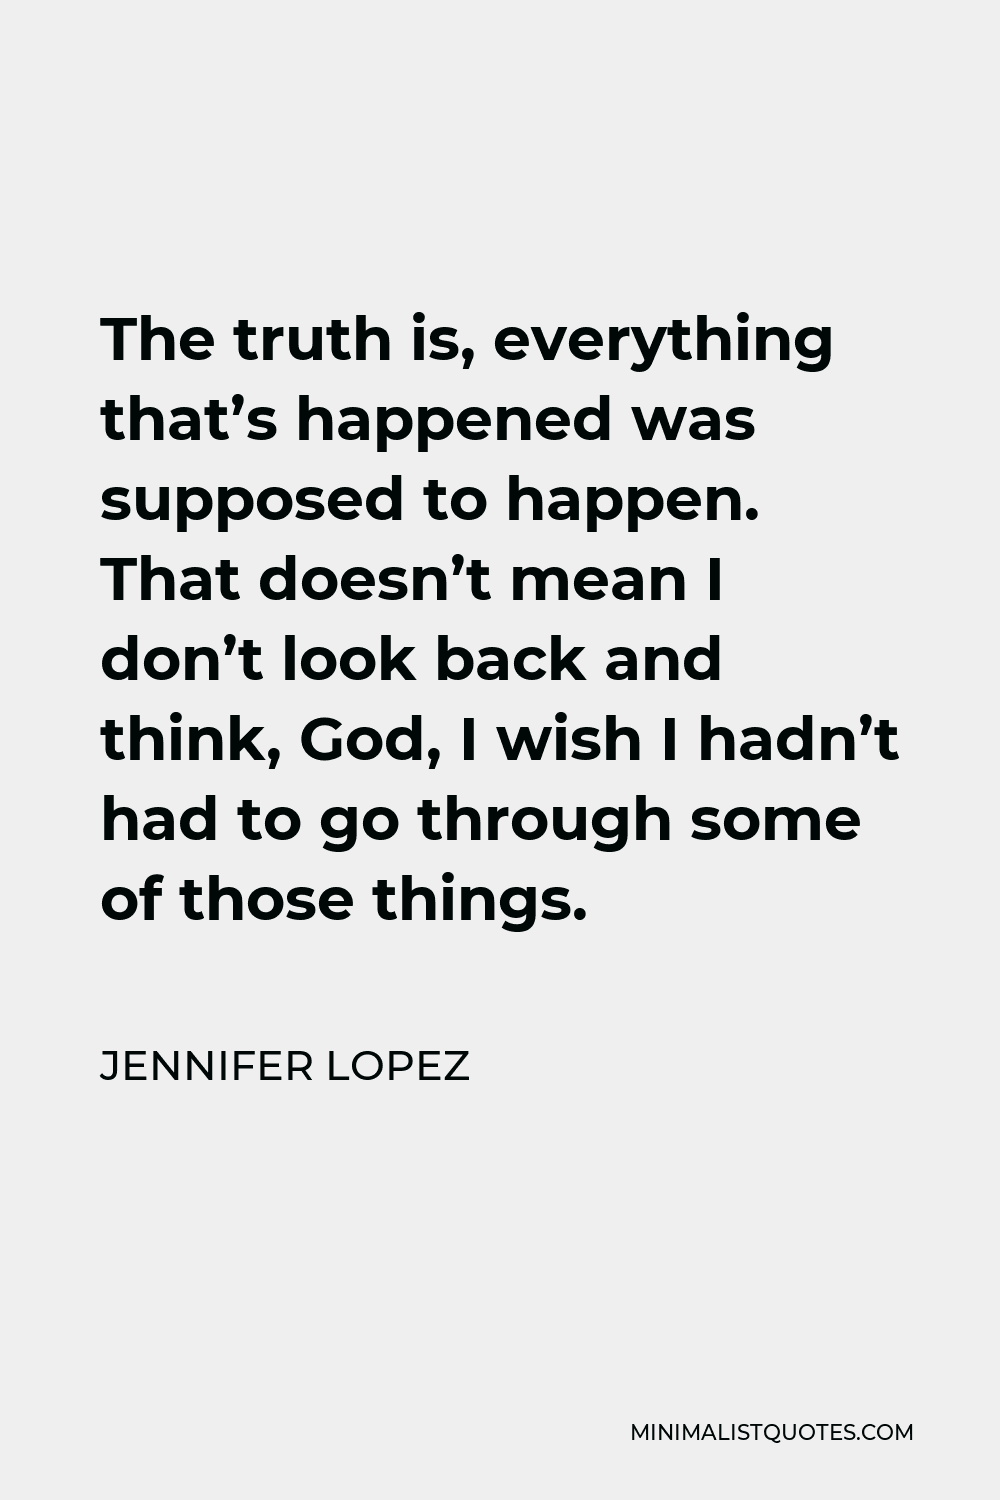 Jennifer Lopez Quote - The truth is, everything that’s happened was supposed to happen. That doesn’t mean I don’t look back and think, God, I wish I hadn’t had to go through some of those things.